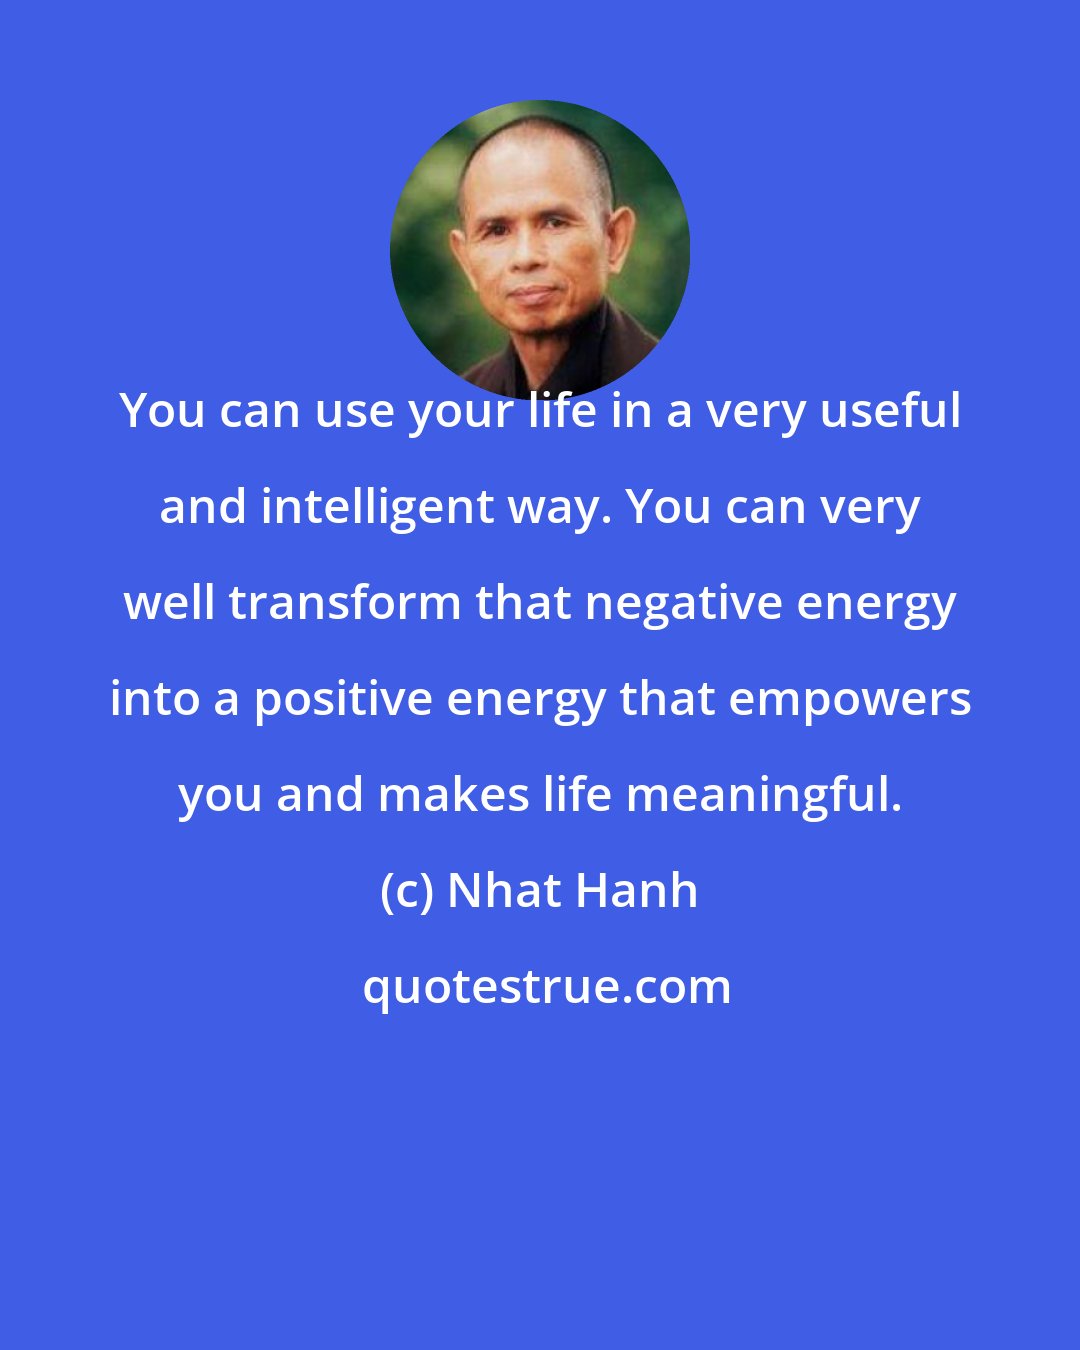 Nhat Hanh: You can use your life in a very useful and intelligent way. You can very well transform that negative energy into a positive energy that empowers you and makes life meaningful.